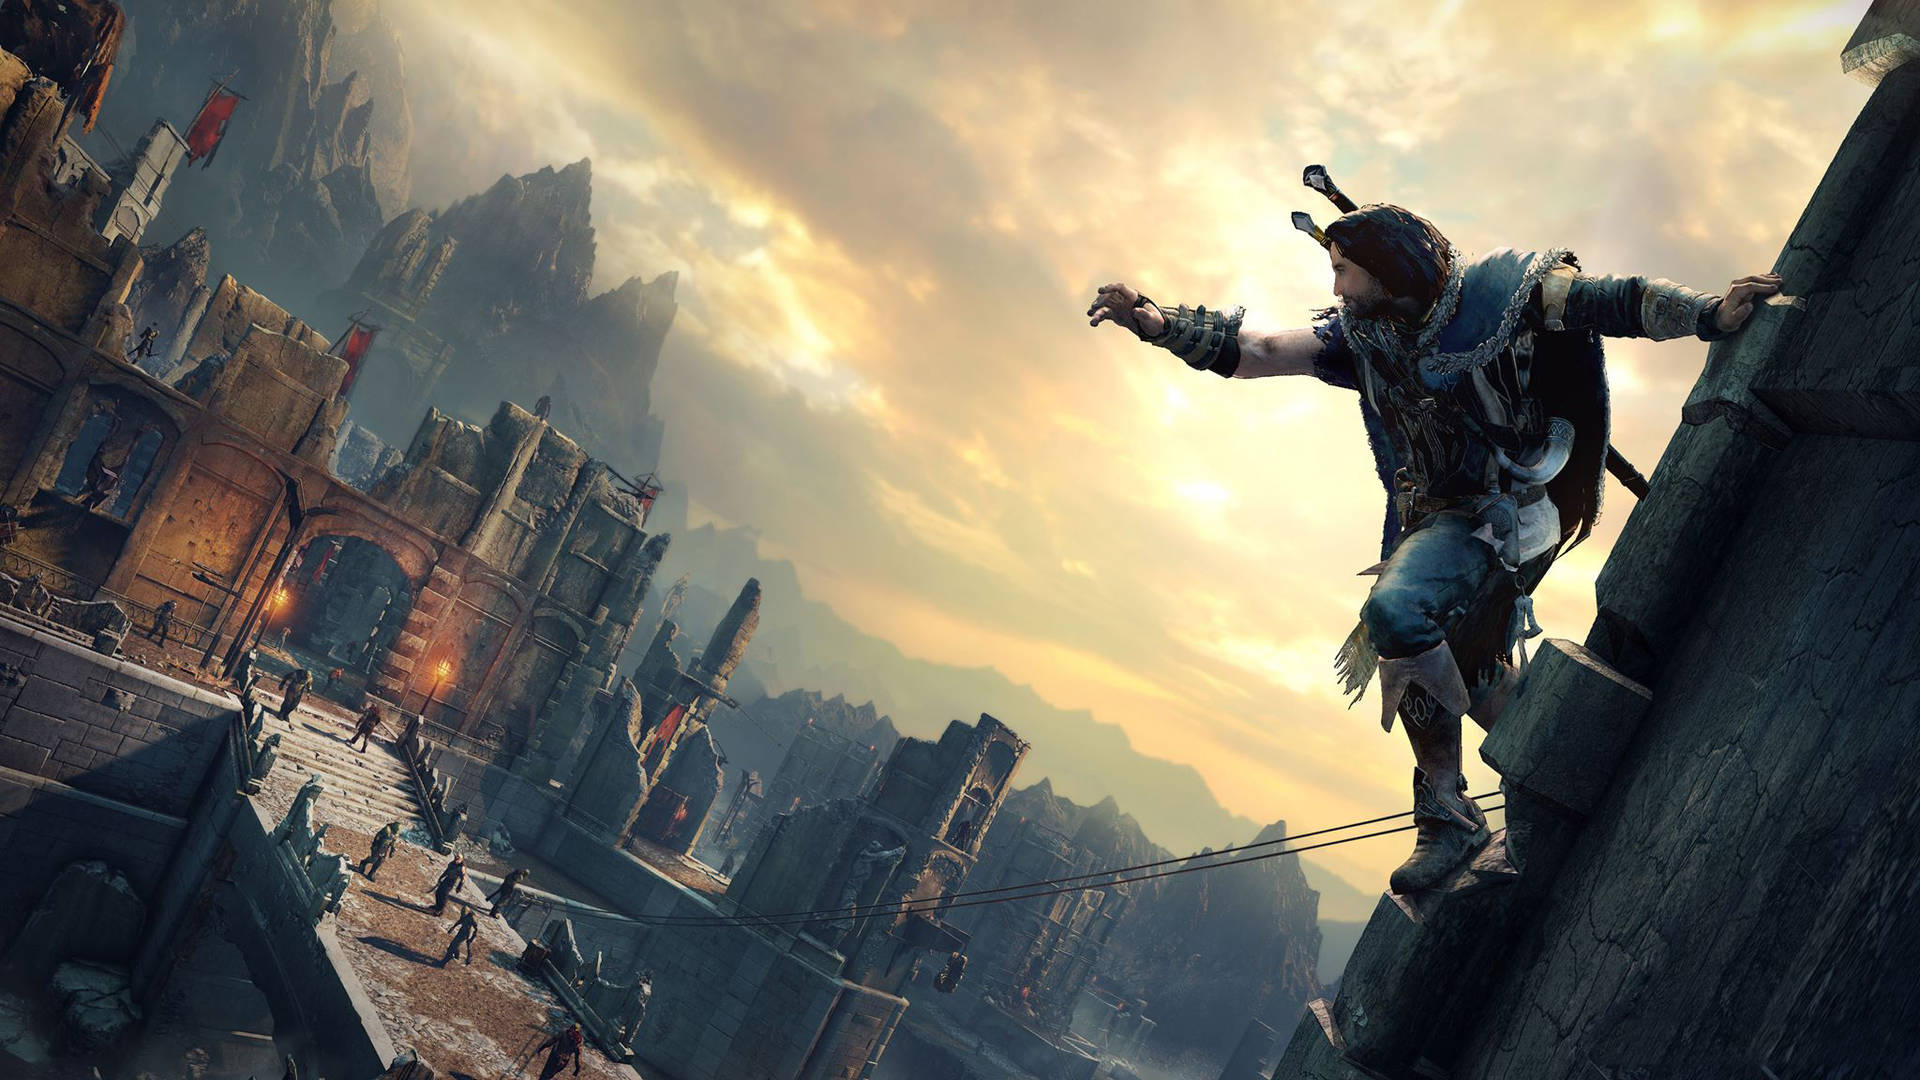 Shadow Of Mordor Warrior In Tower